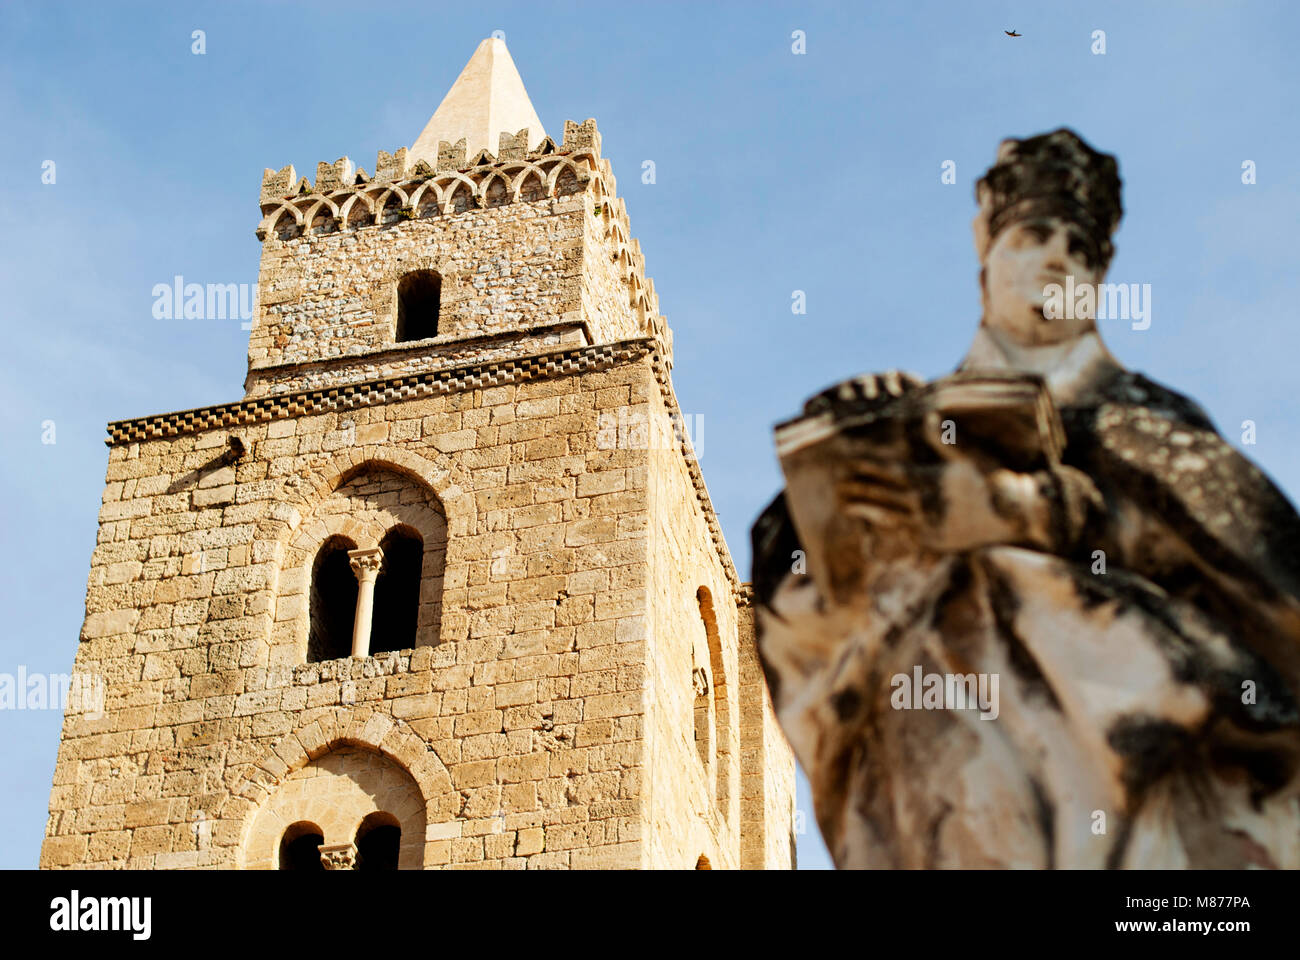 Statue of Cathedral, Cefalù Stock Photo